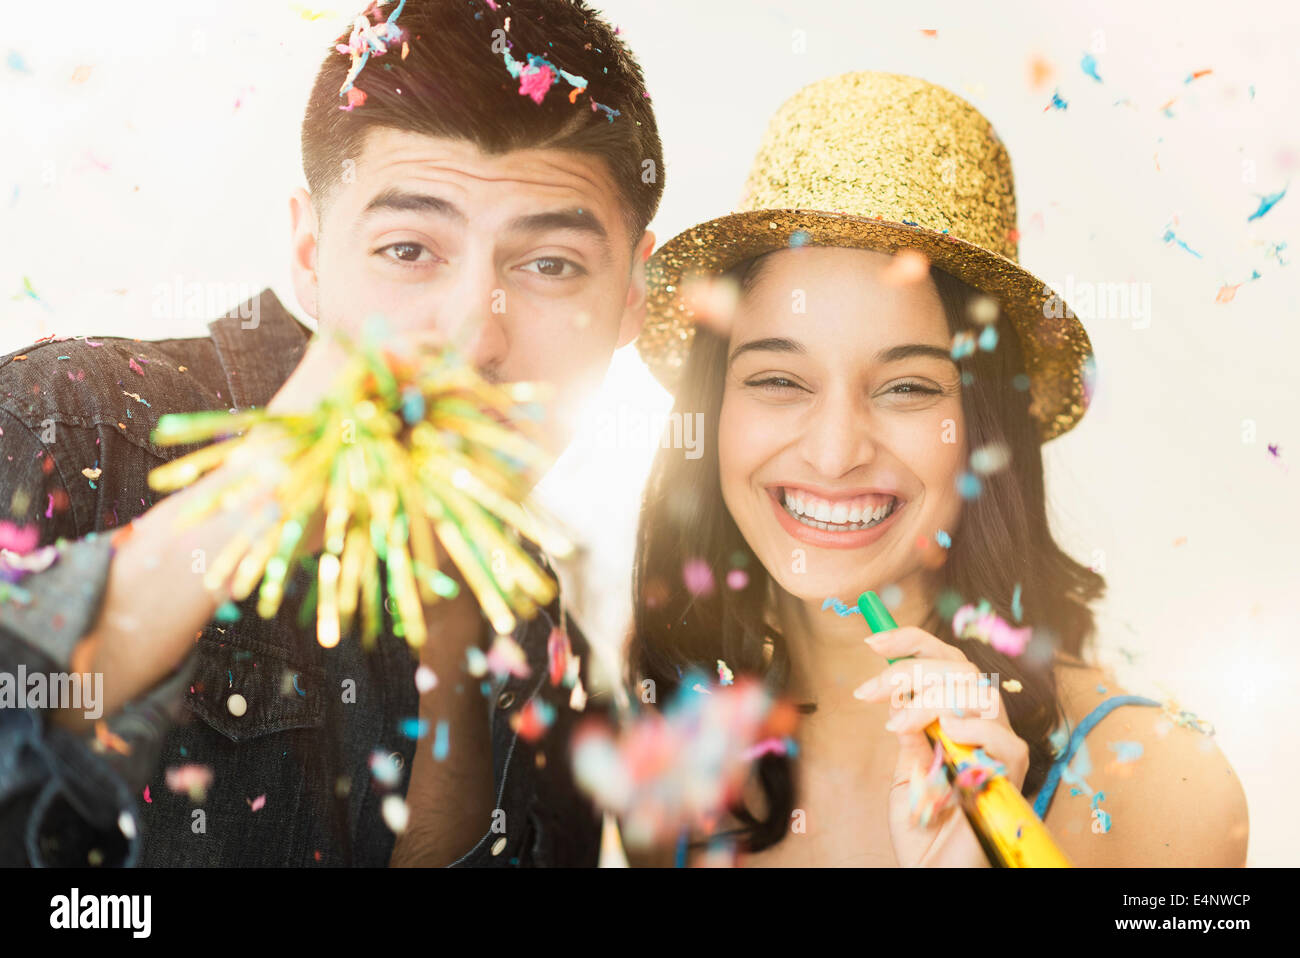 Young couple celebrating New Year's Eve Stock Photo